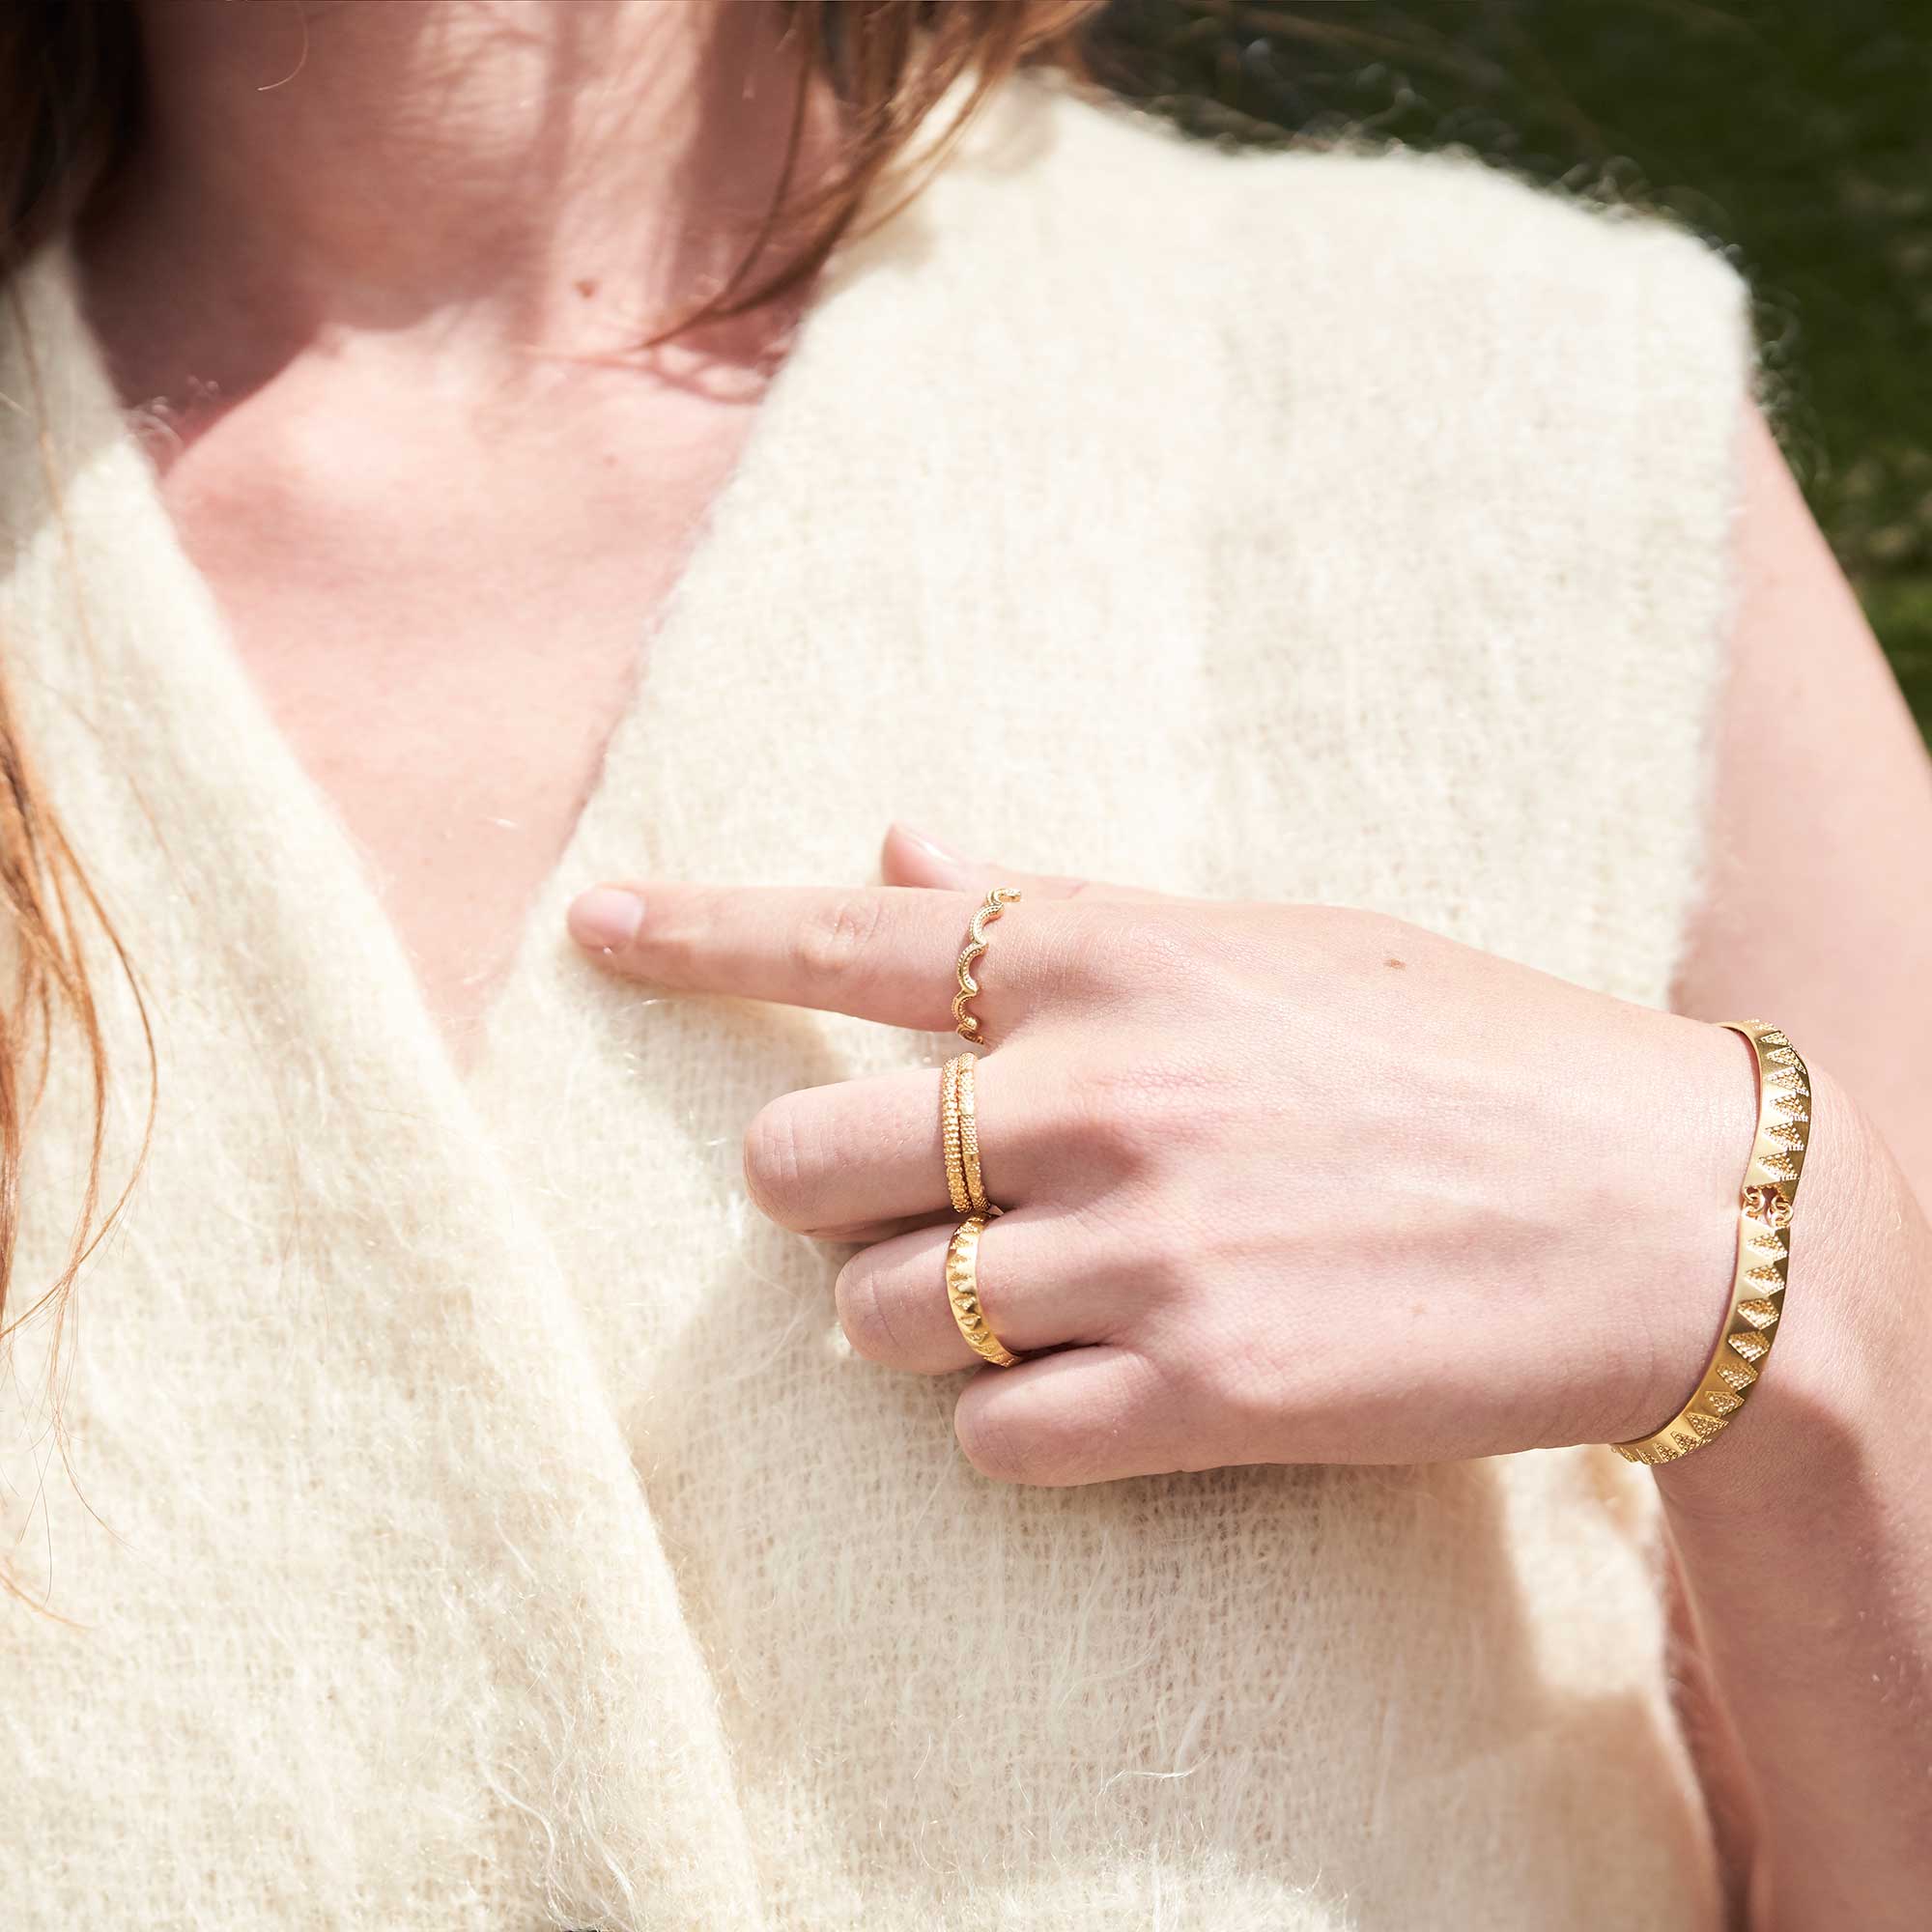 Chasm Yellow Gold Open Ring worn by model in woolen top